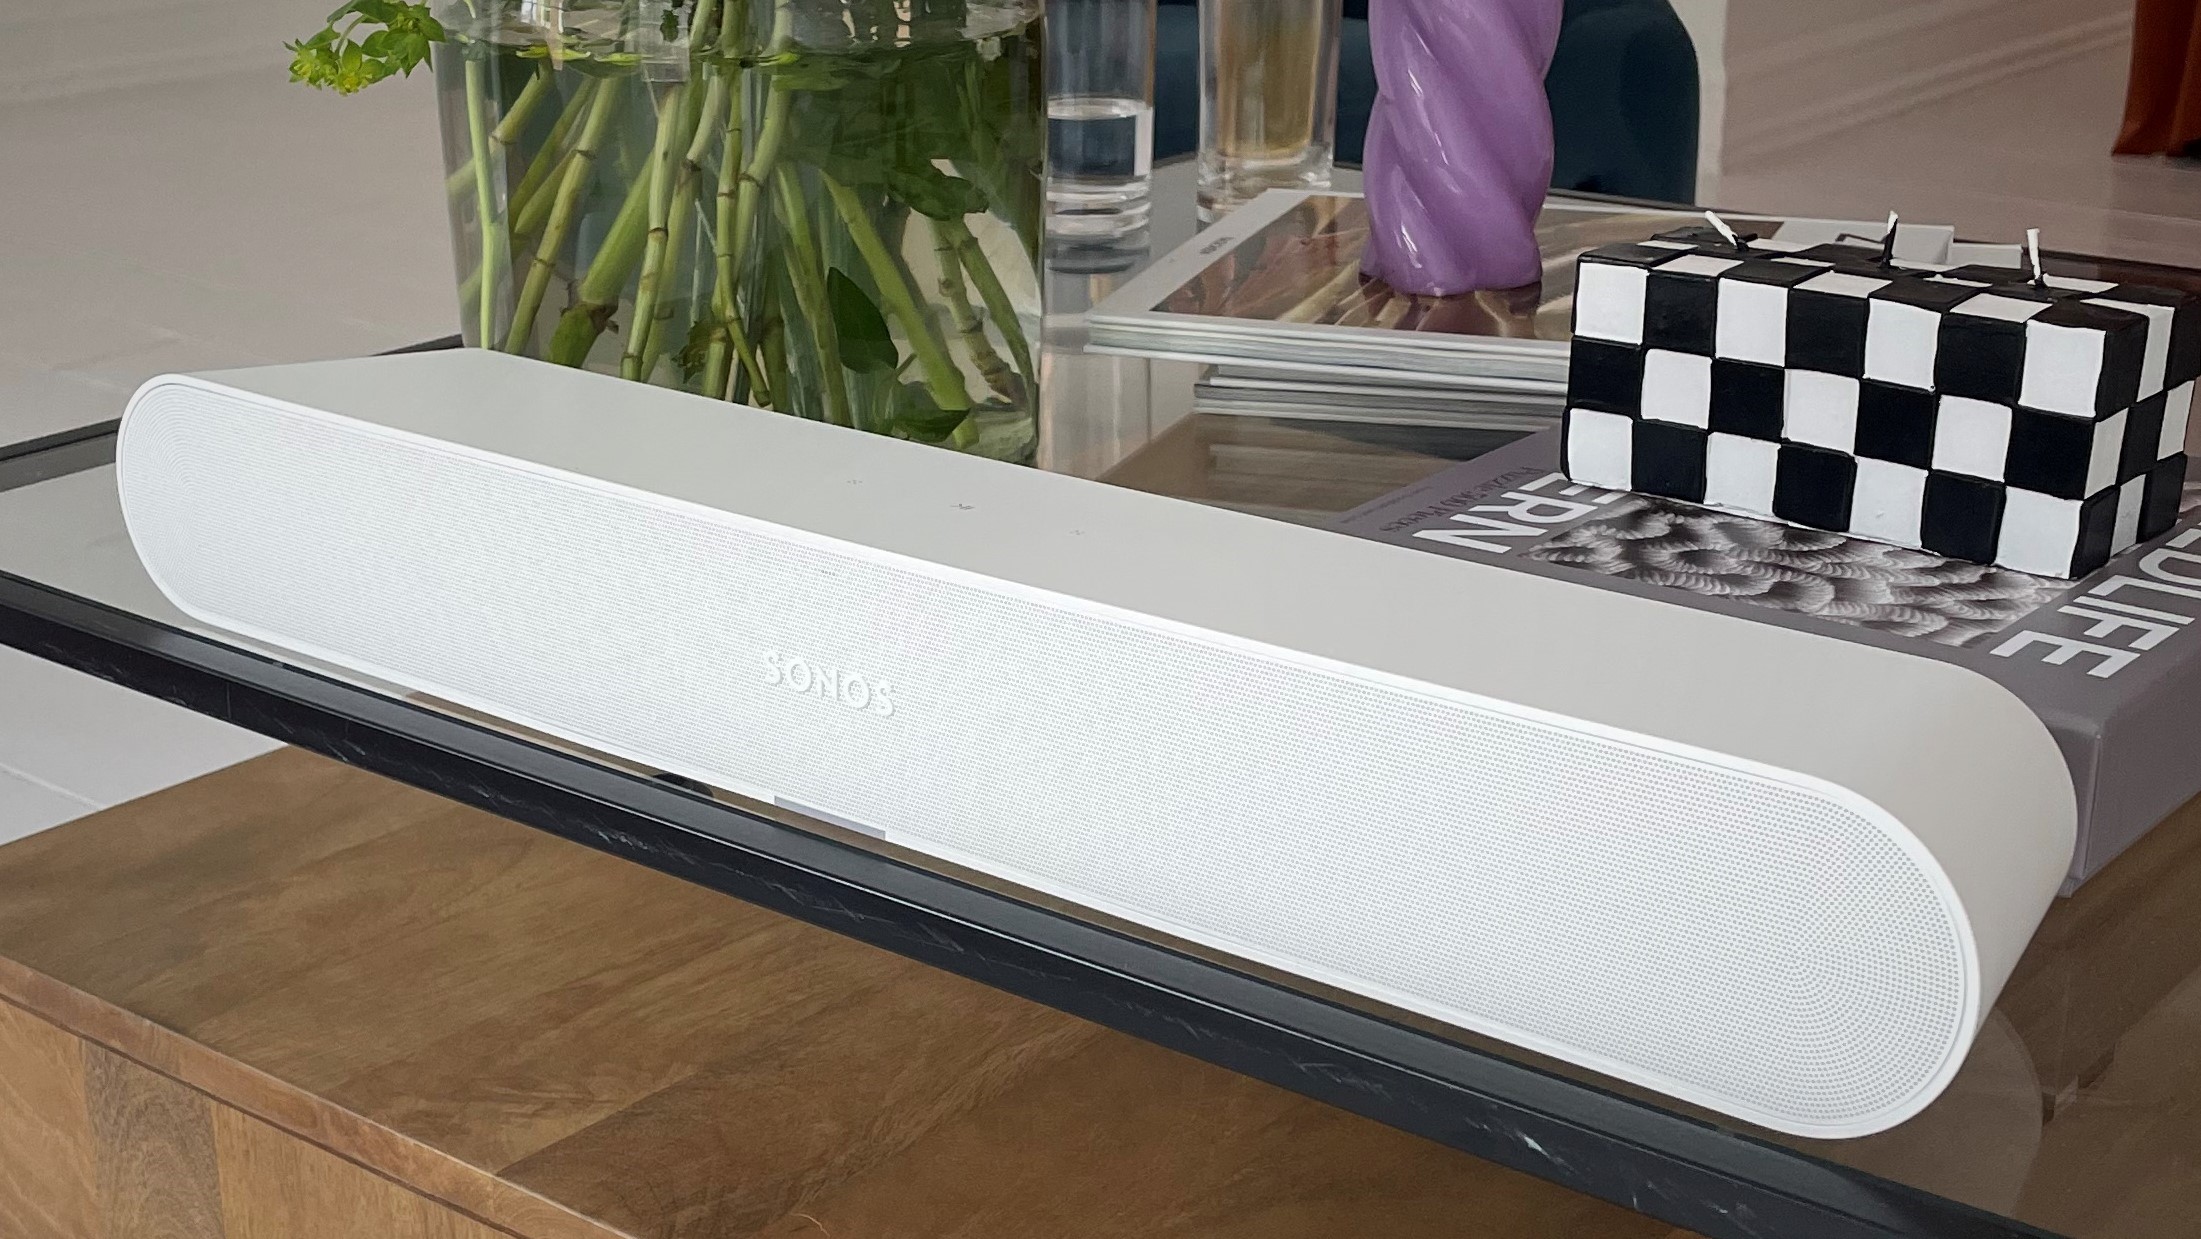 Sonos Ray on a coffee table